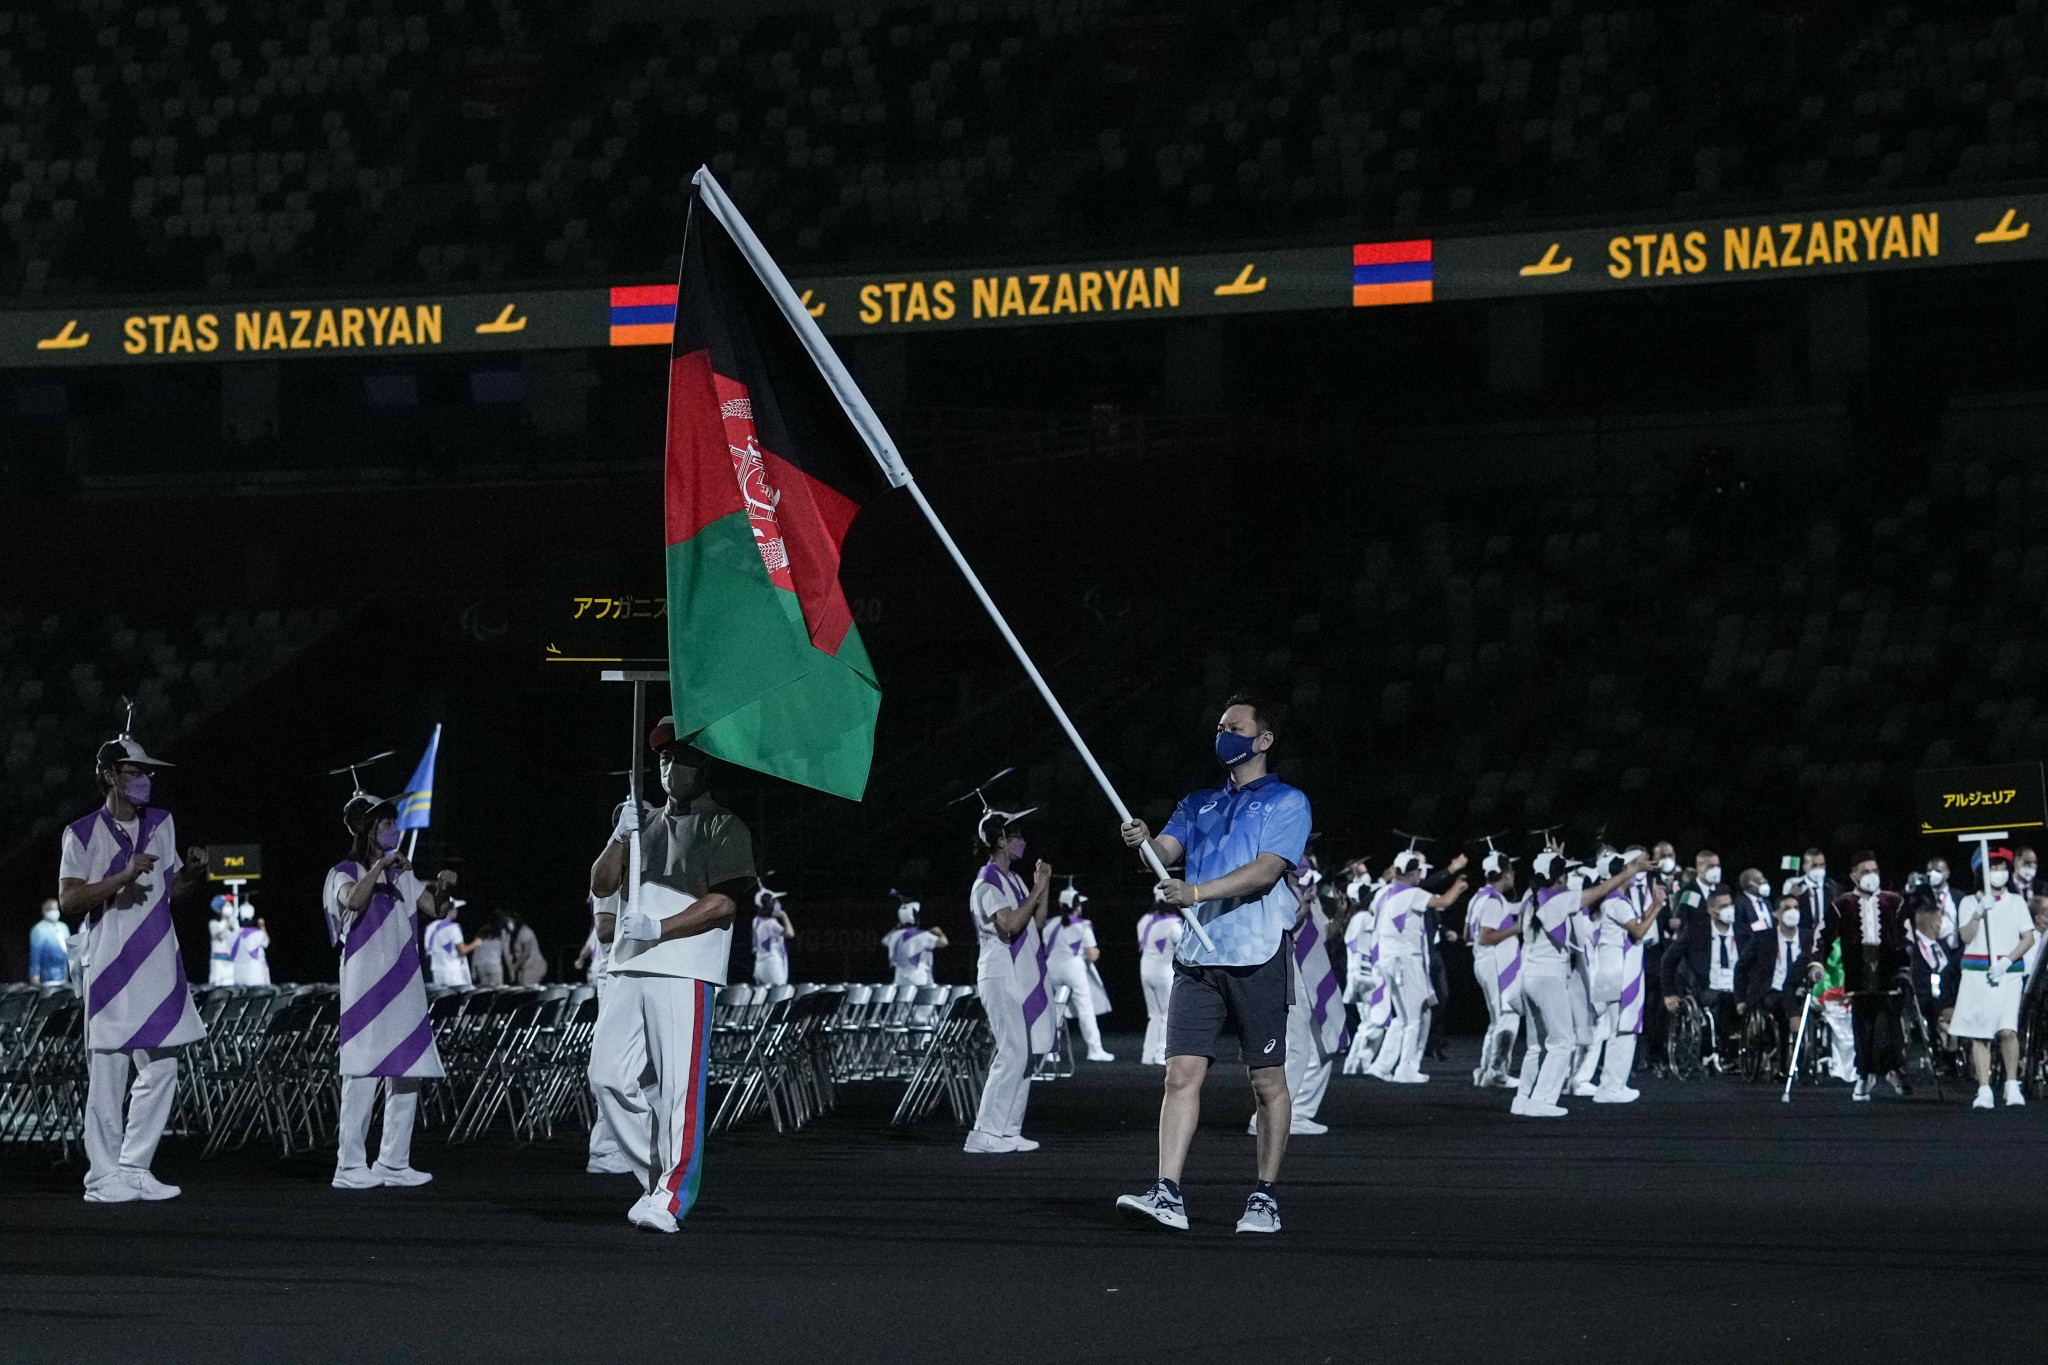 Craig Spence, spokesperson for the IPC, said the decision to have the Afghanistan flag at the Paralympic Opening Ceremony was the 